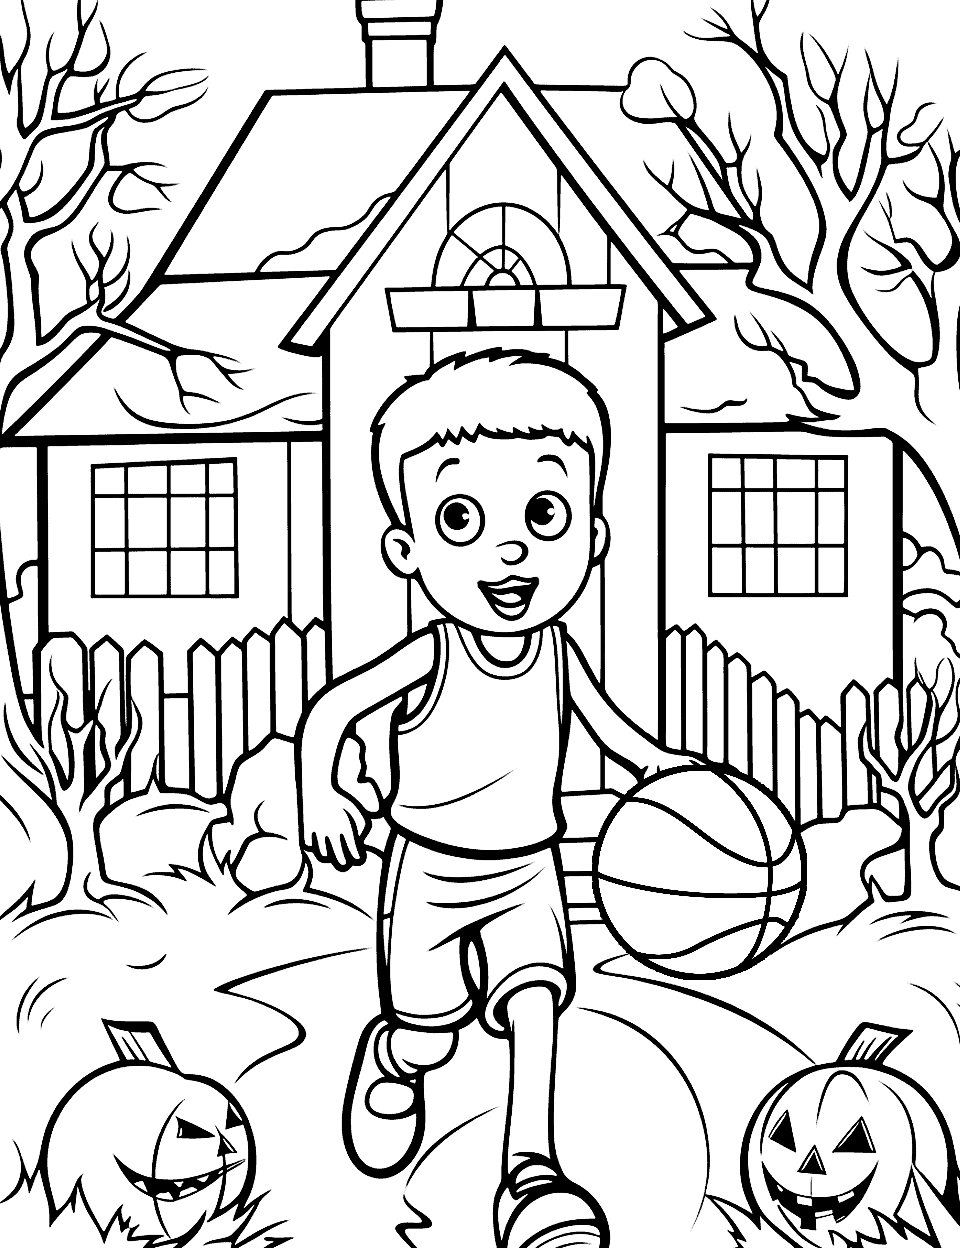 Haunted House Half-Court Basketball Coloring Page - A spooky haunted house backdrop with a kid playing basketball in the front yard.